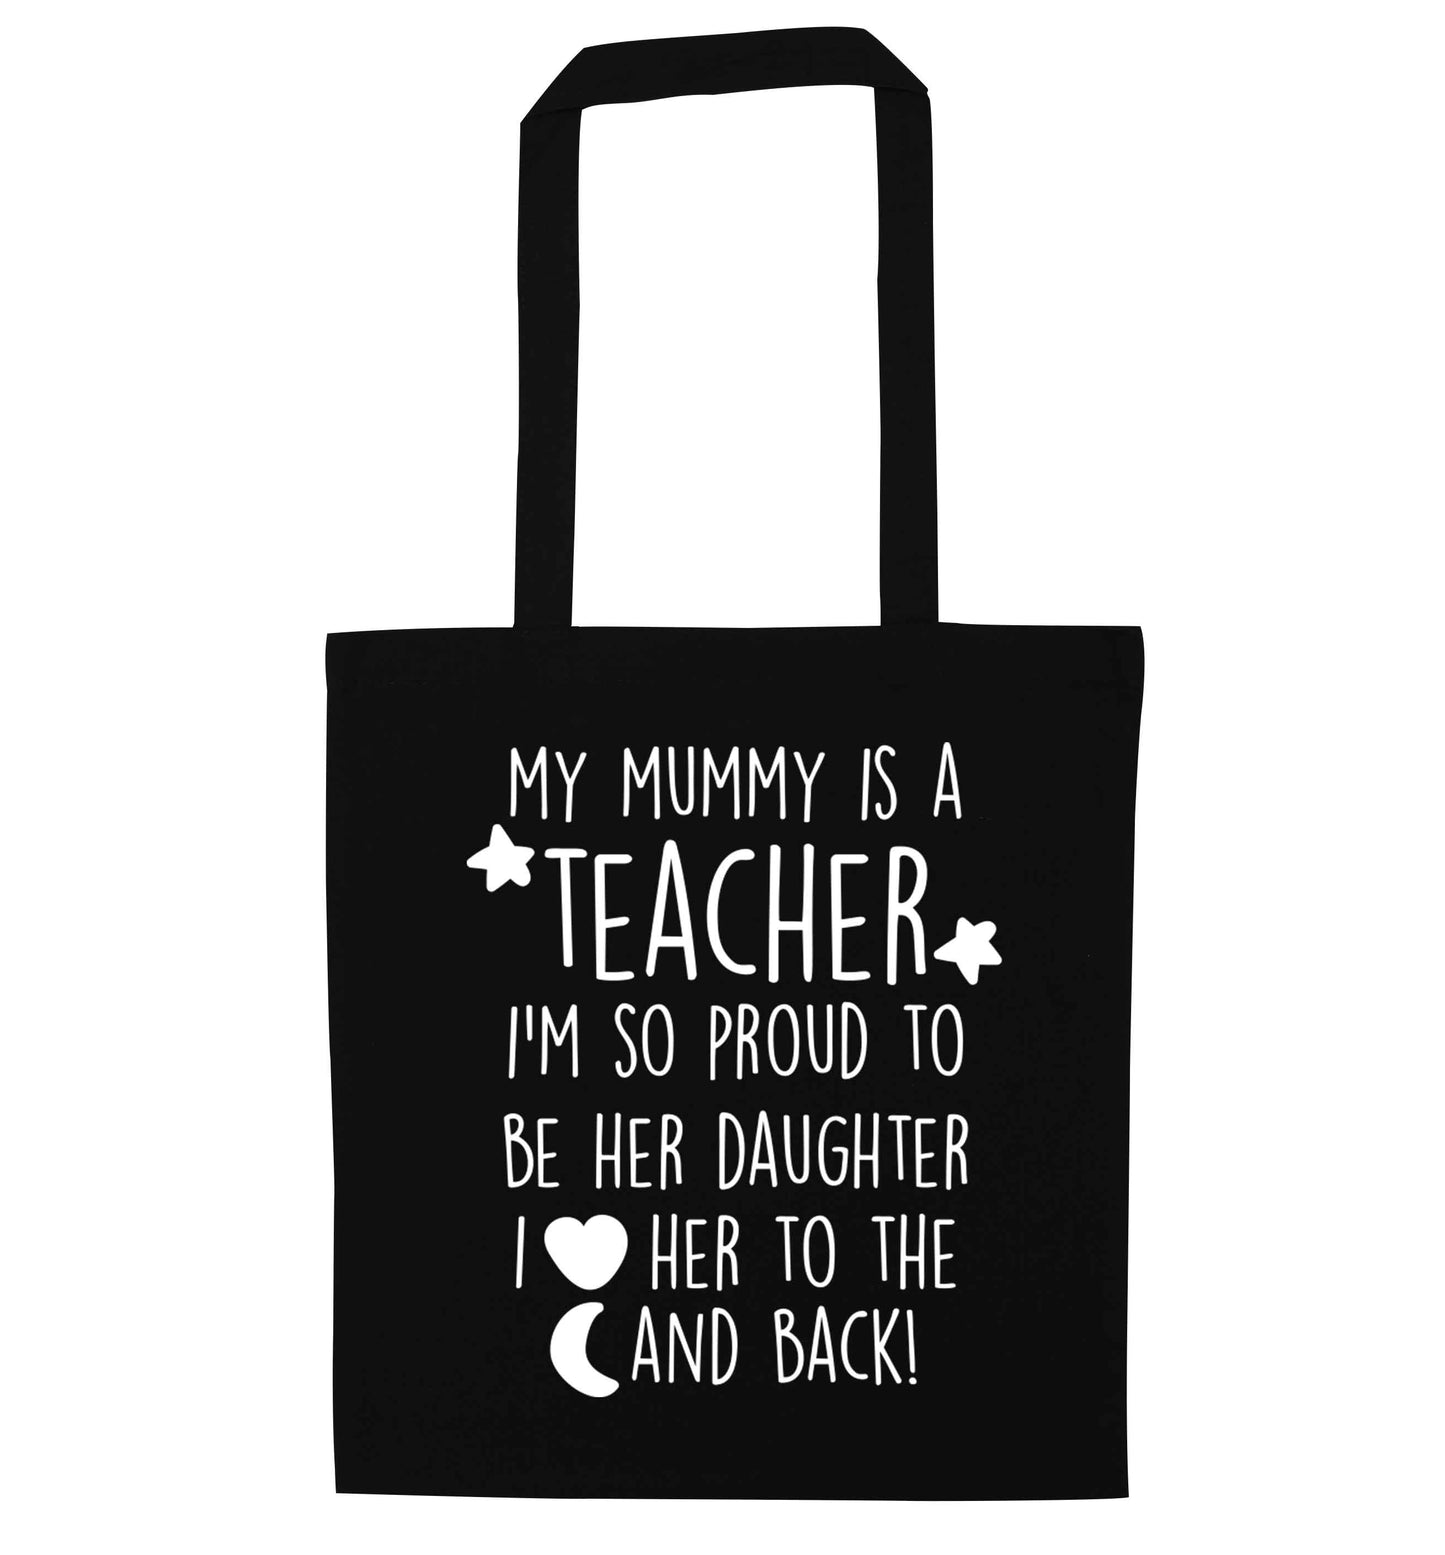 My mummy is a teacher I'm so proud to be her daughter I love her to the moon and back black tote bag